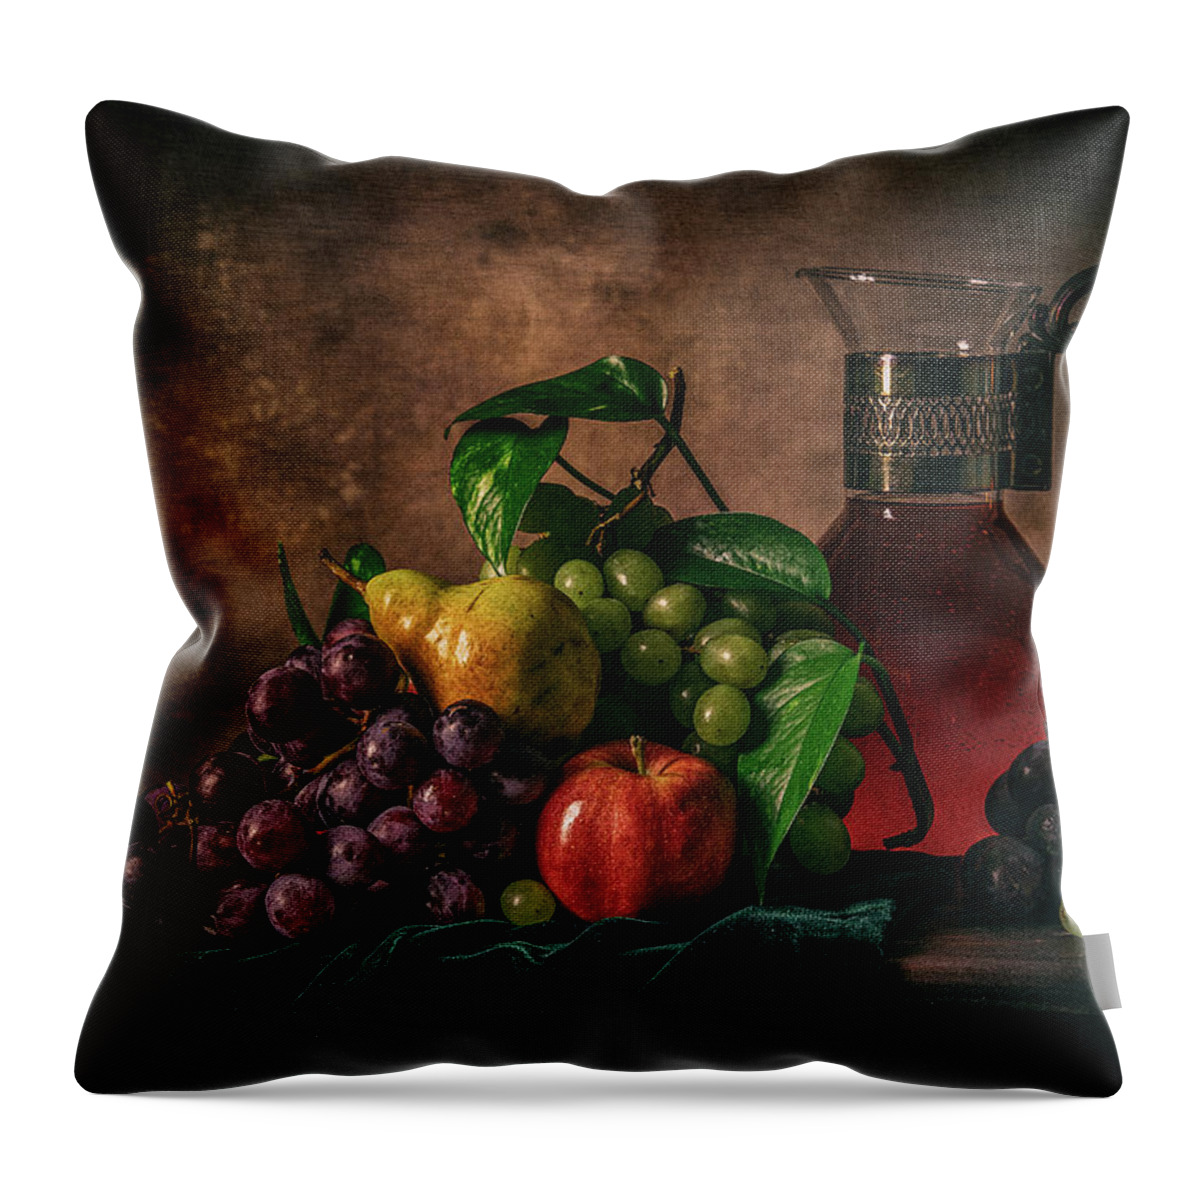 Fruits Throw Pillow featuring the photograph Fruits by Anna Rumiantseva